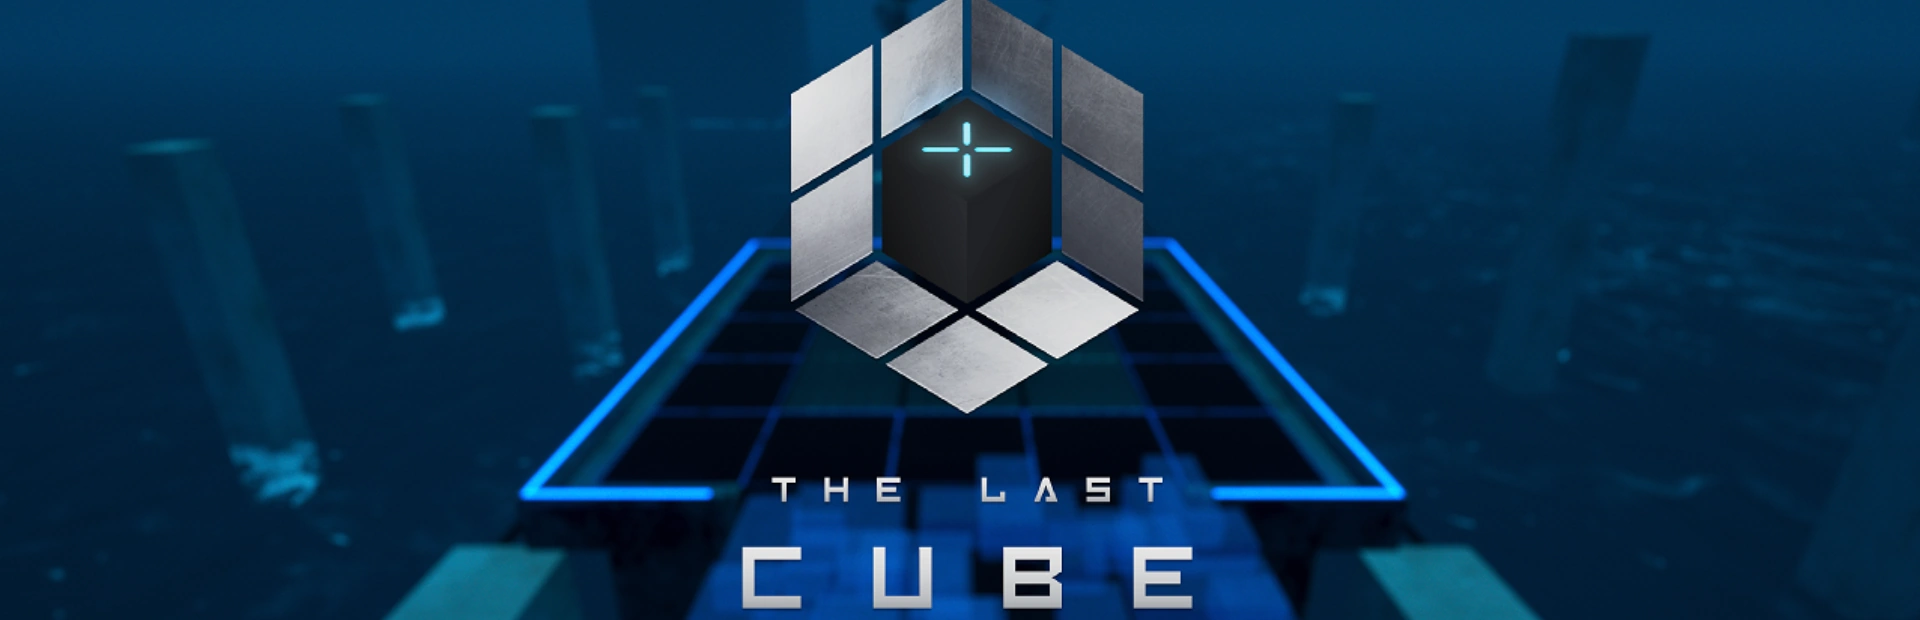 The.Last .Cube .banner2